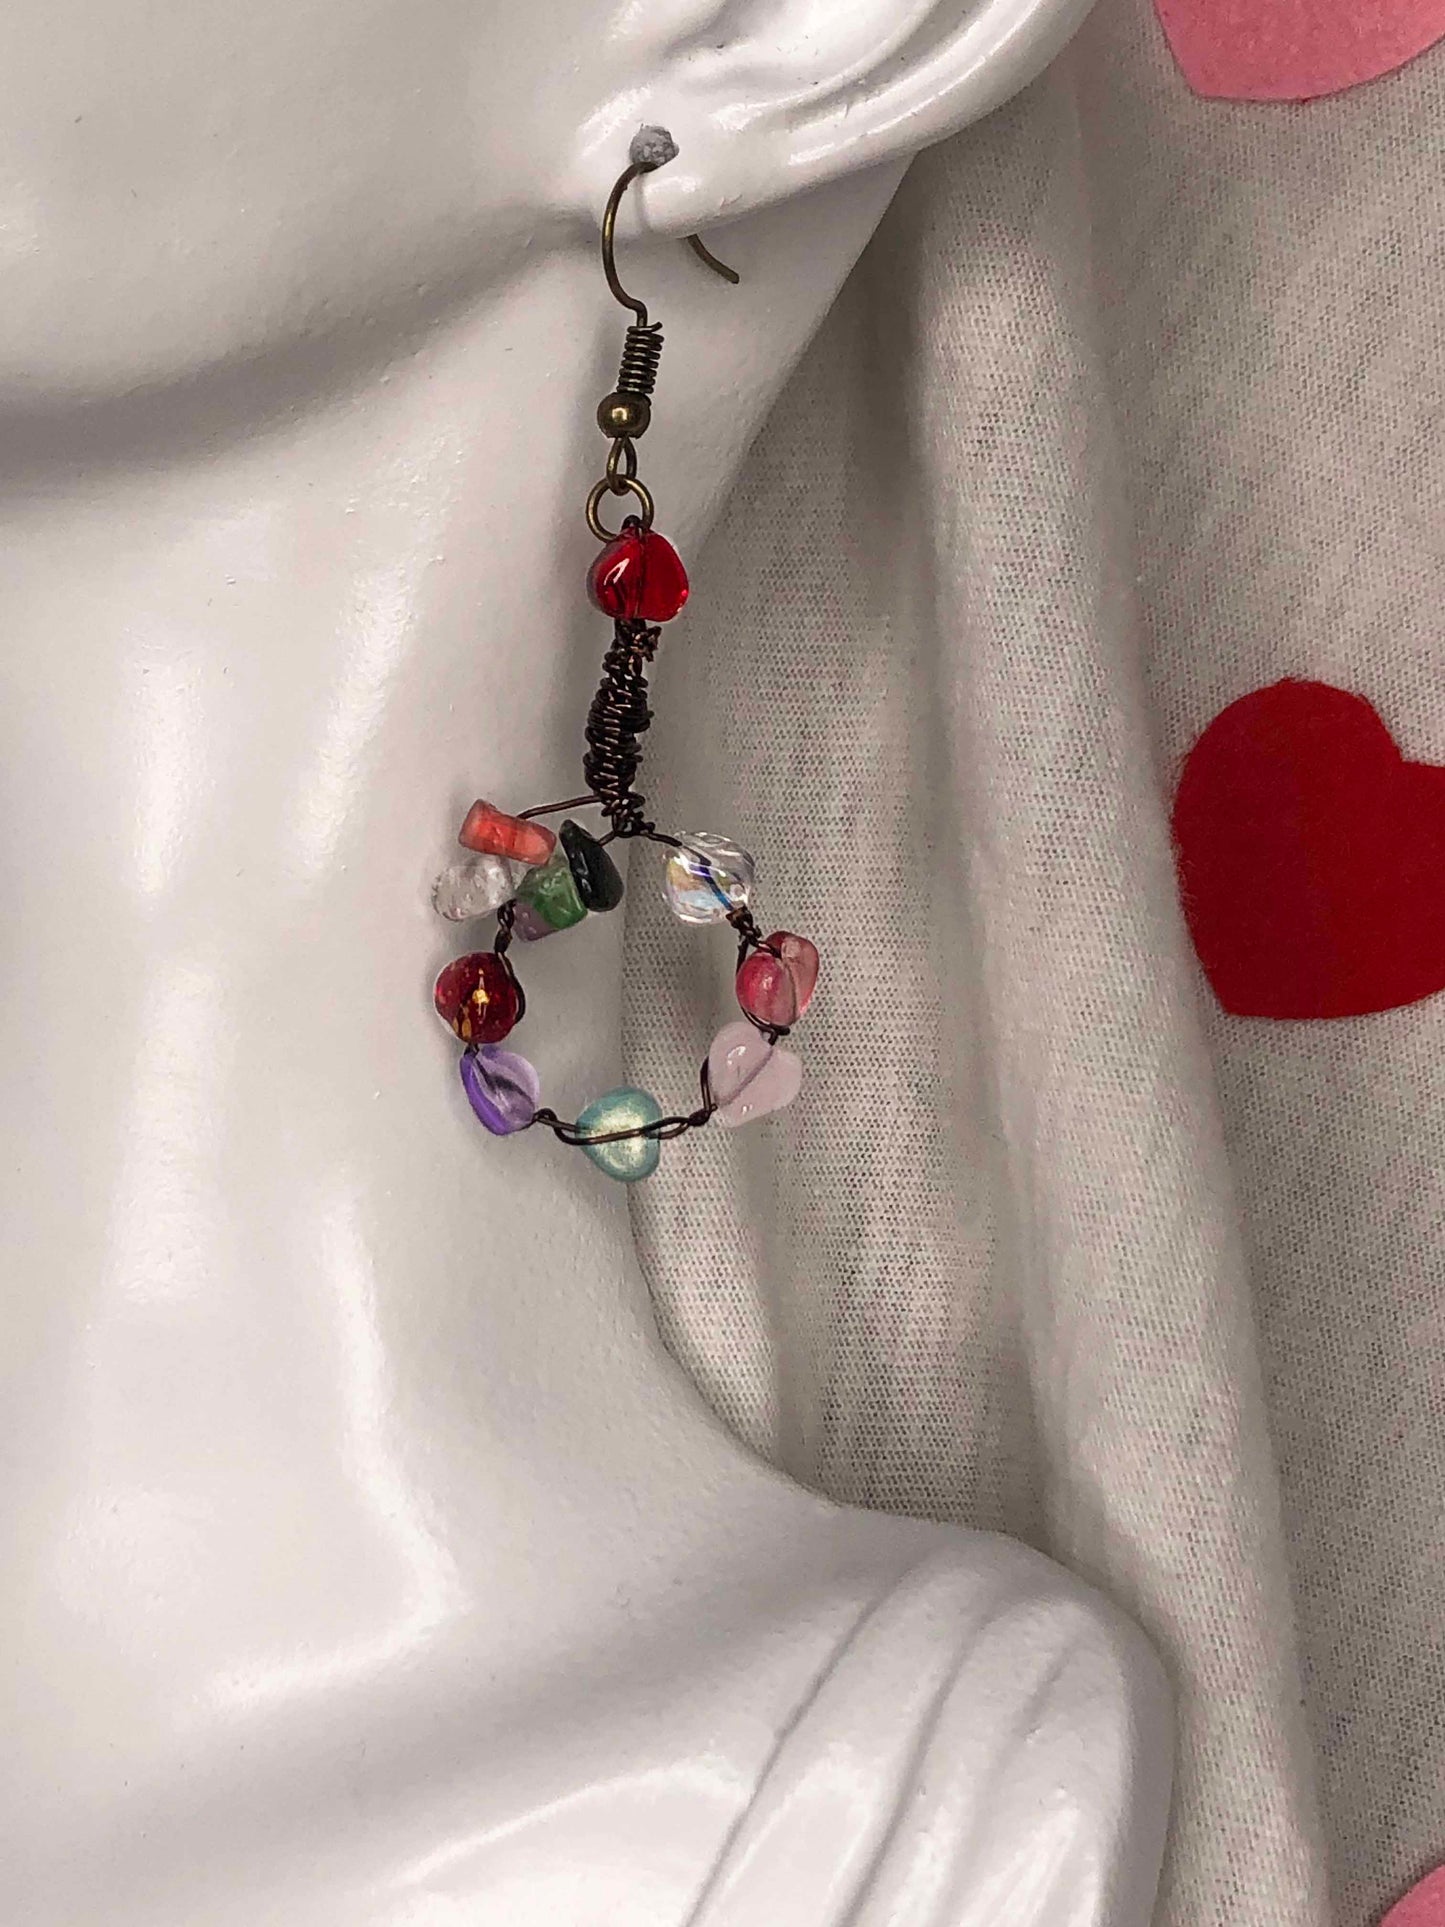 Handmade wire wrapped drop dangle earrings with multicolored heart beads and gemstones.